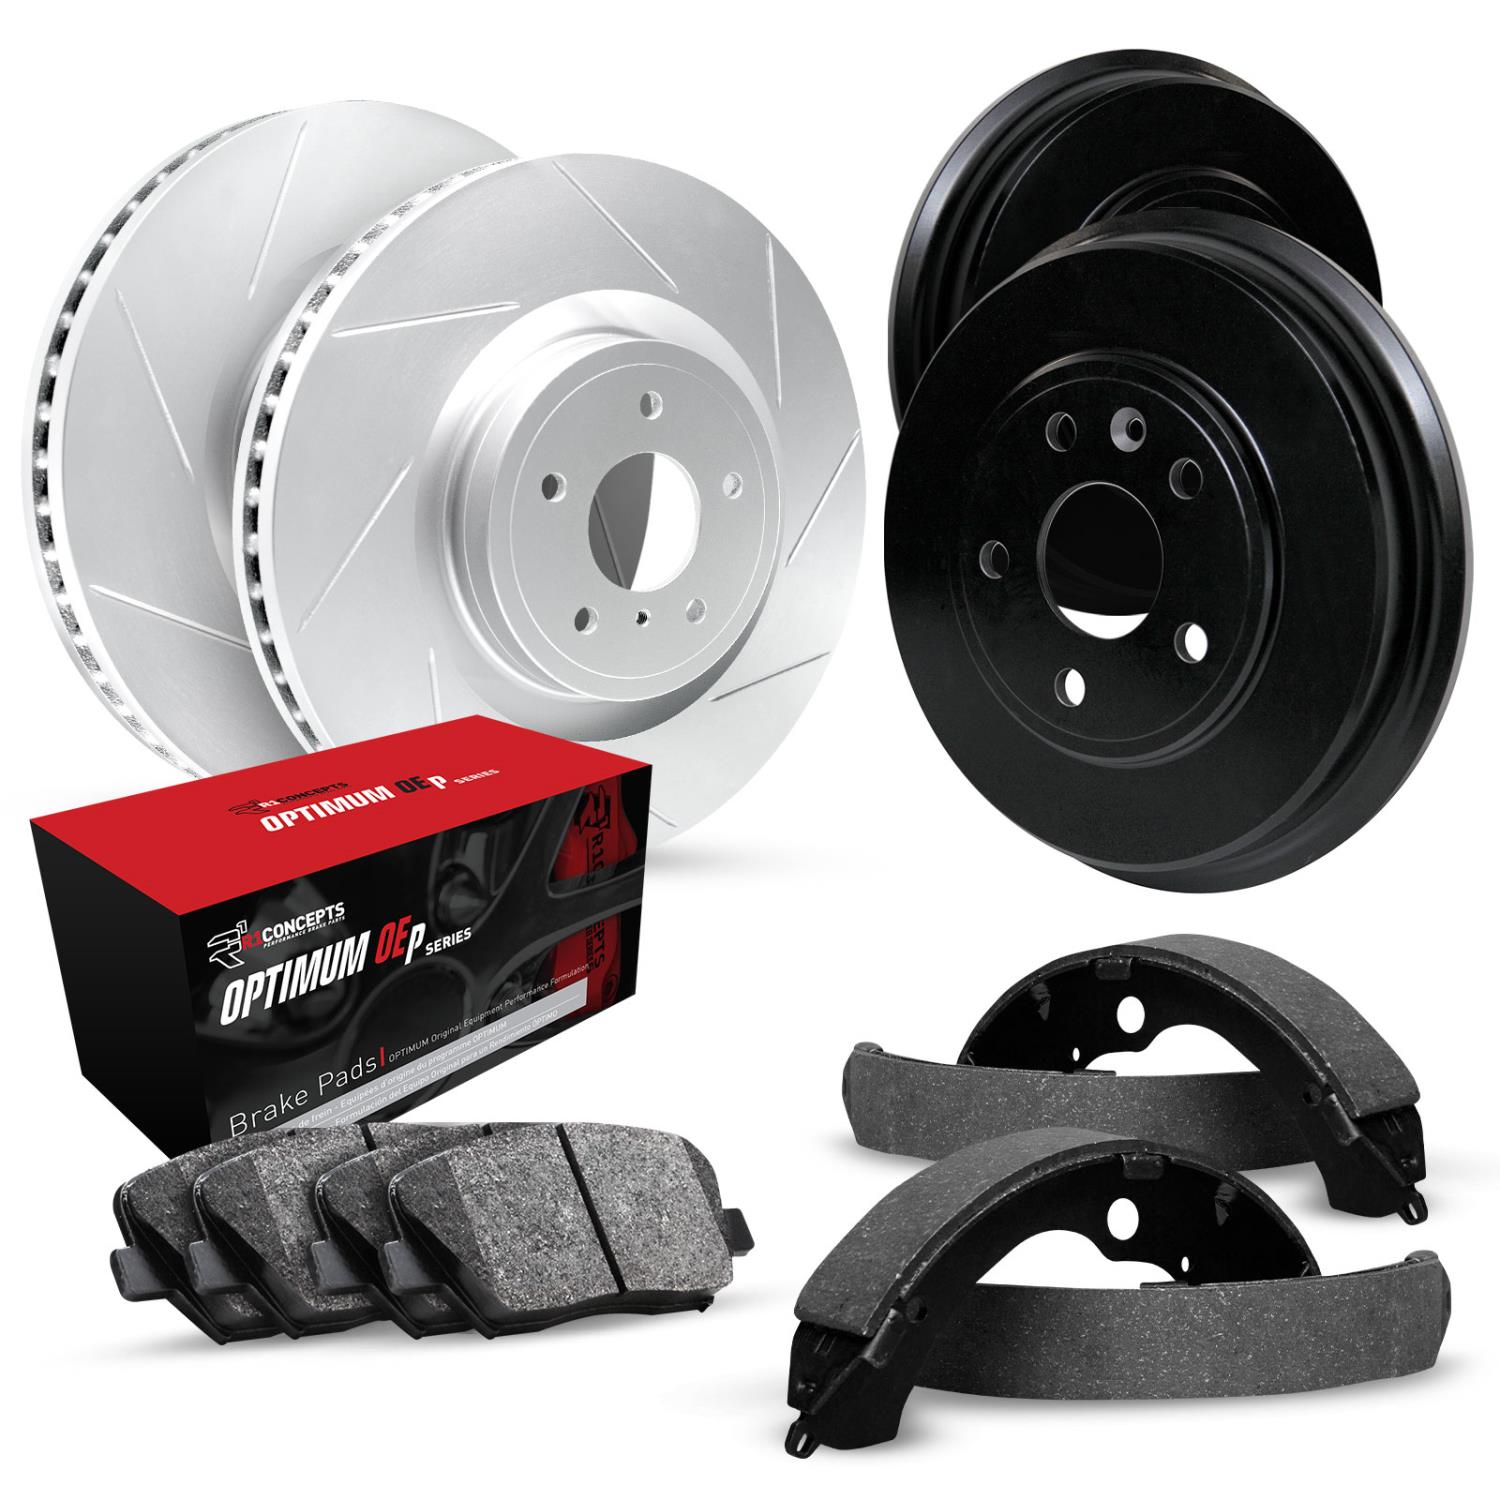 GEO-Carbon Slotted Brake Rotor & Drum Set w/Optimum OE Pads & Shoes, 1991-1994 GM, Position: Front & Rear